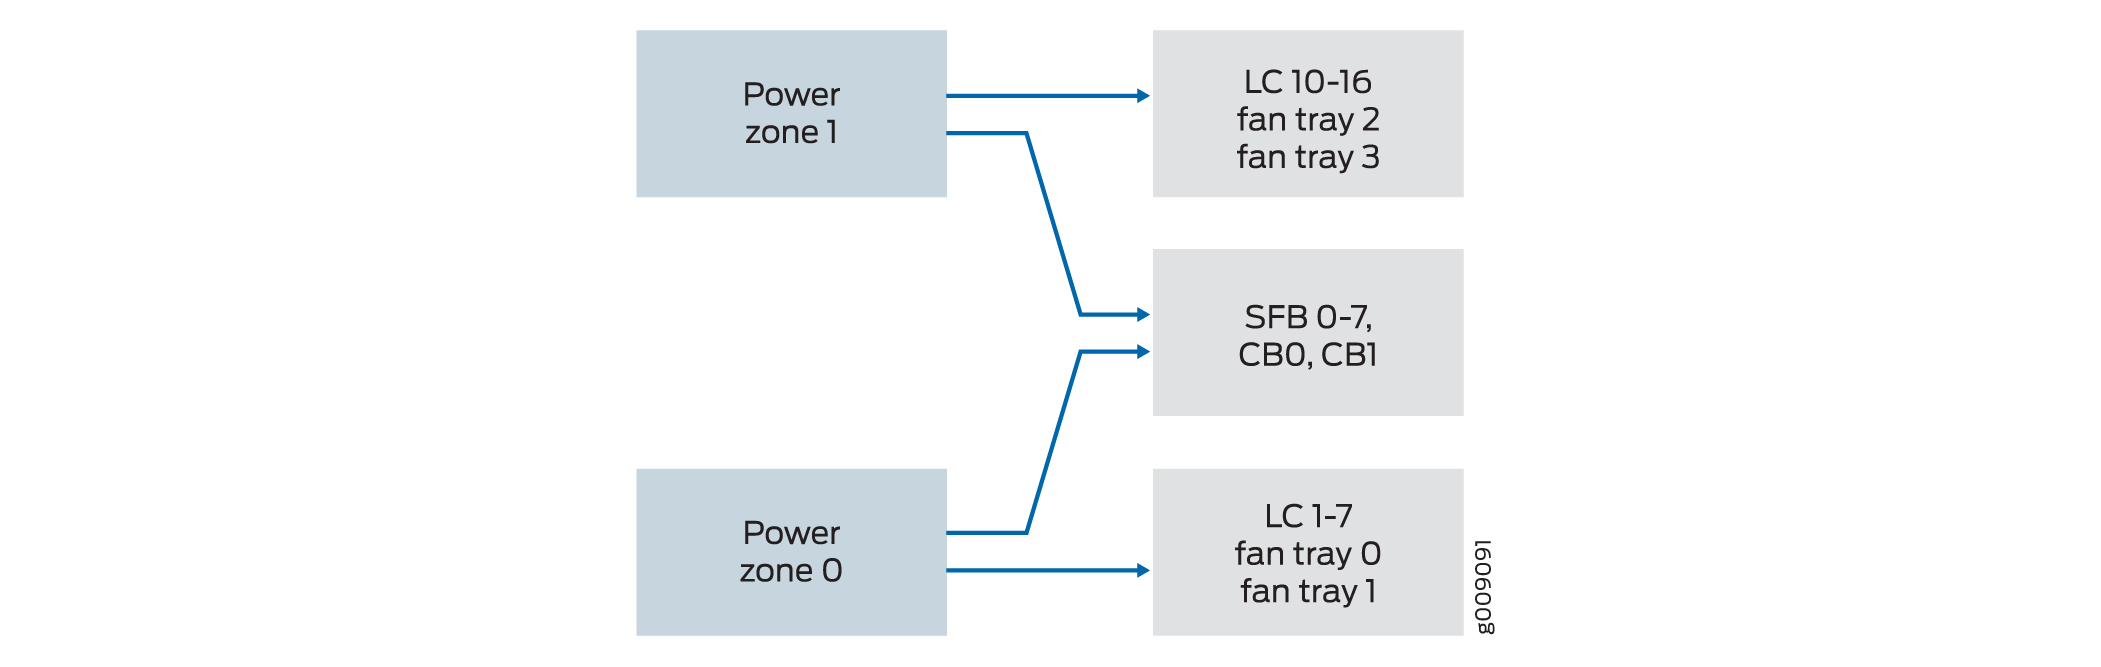 Power Distribution in an Optimized DC Power Subsystem